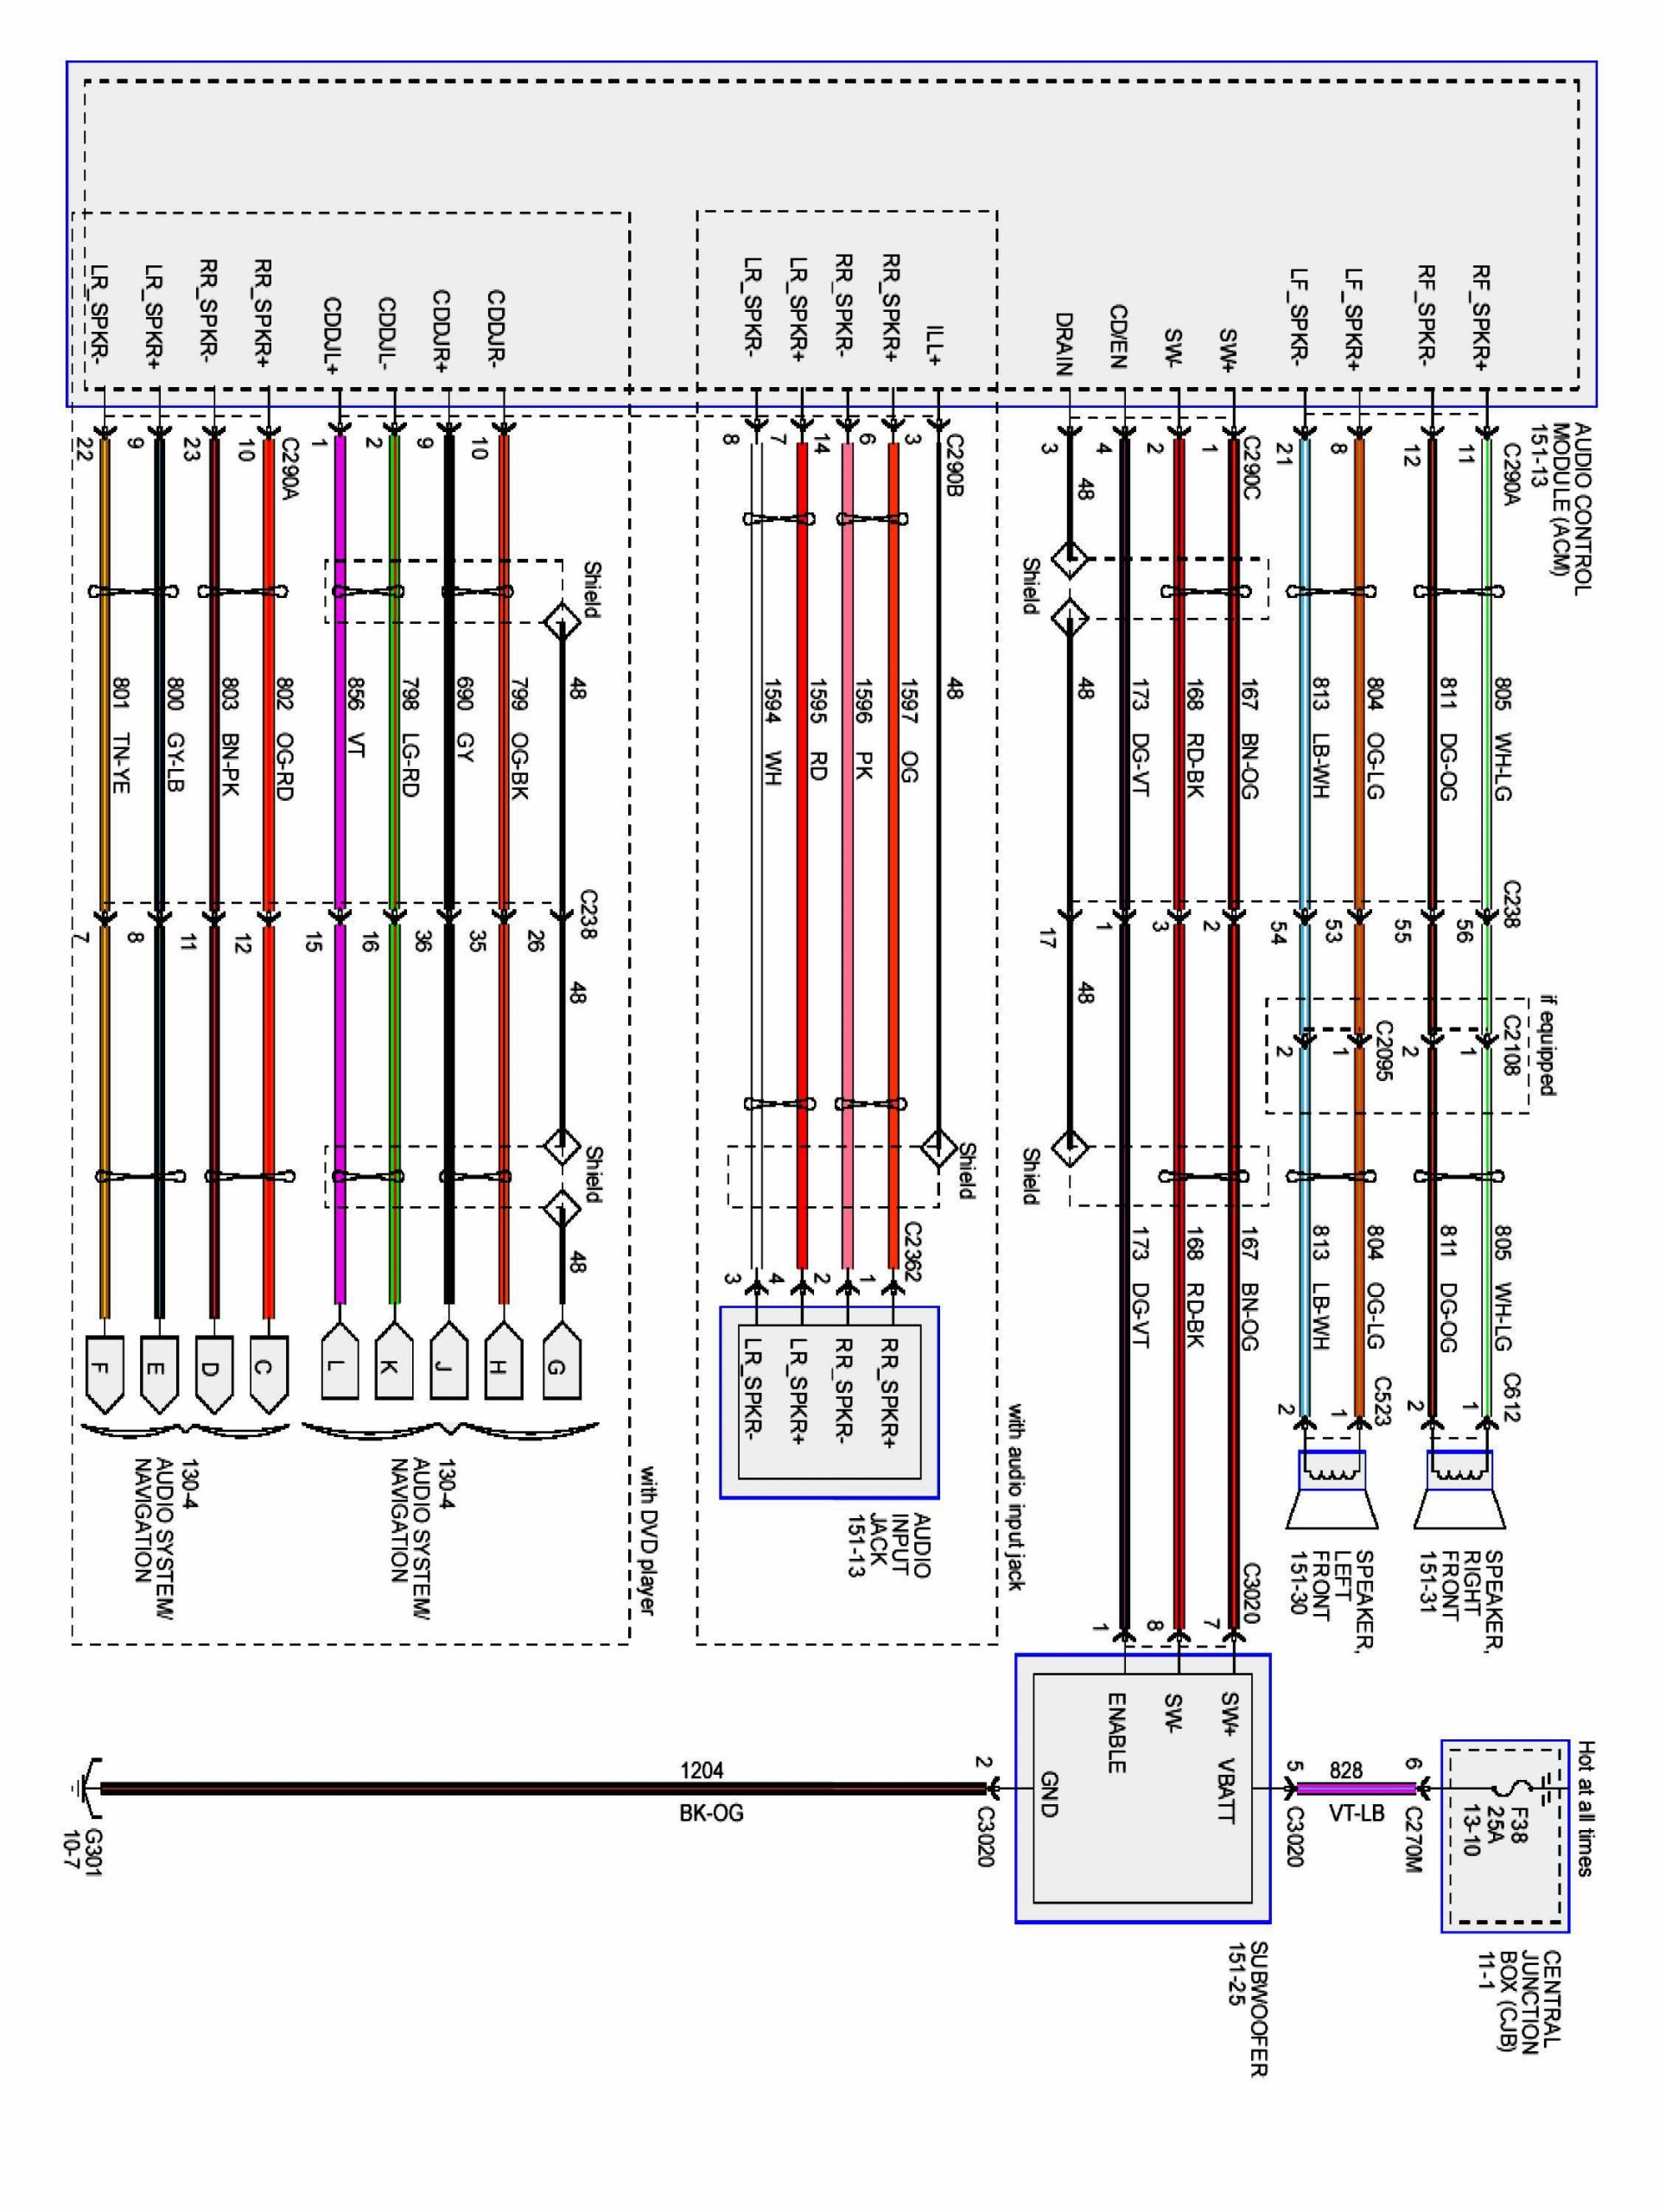 2007 F150 Stereo Wiring Diagram Abs Wiring Harness Diagram Jeep Wrangler Radio Wiring